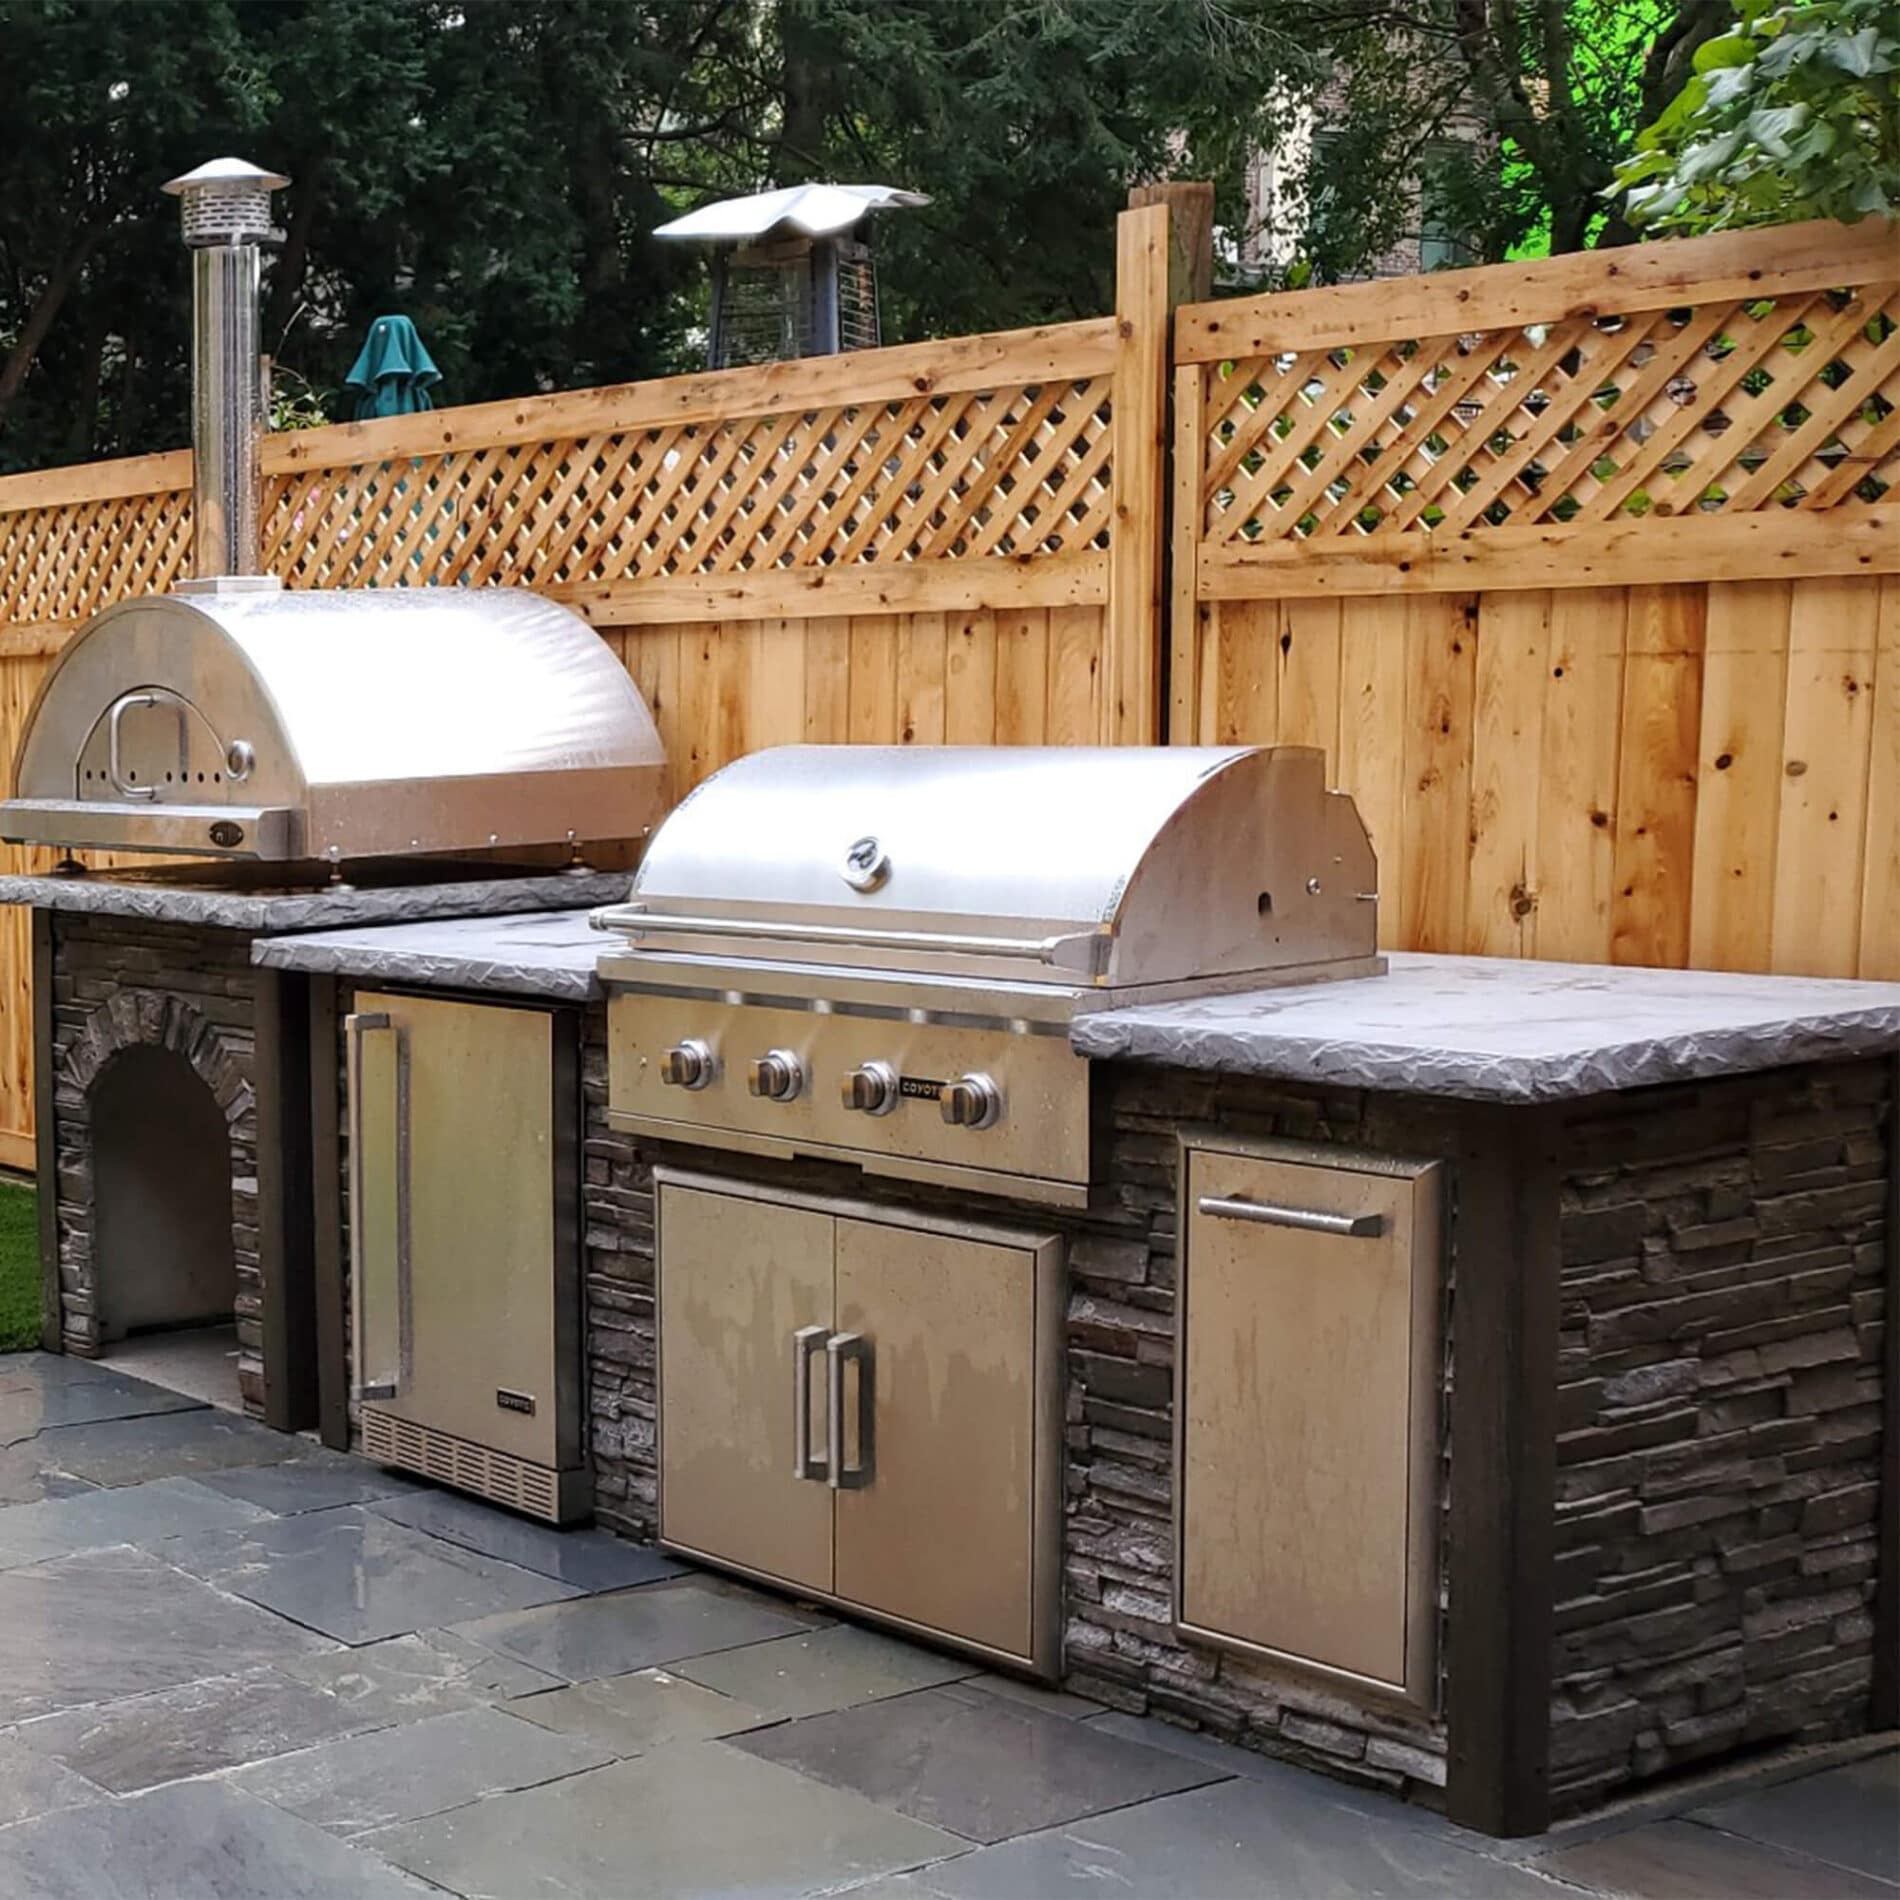 8 Grill Island Stacked Stone, Outdoor Stone Grill